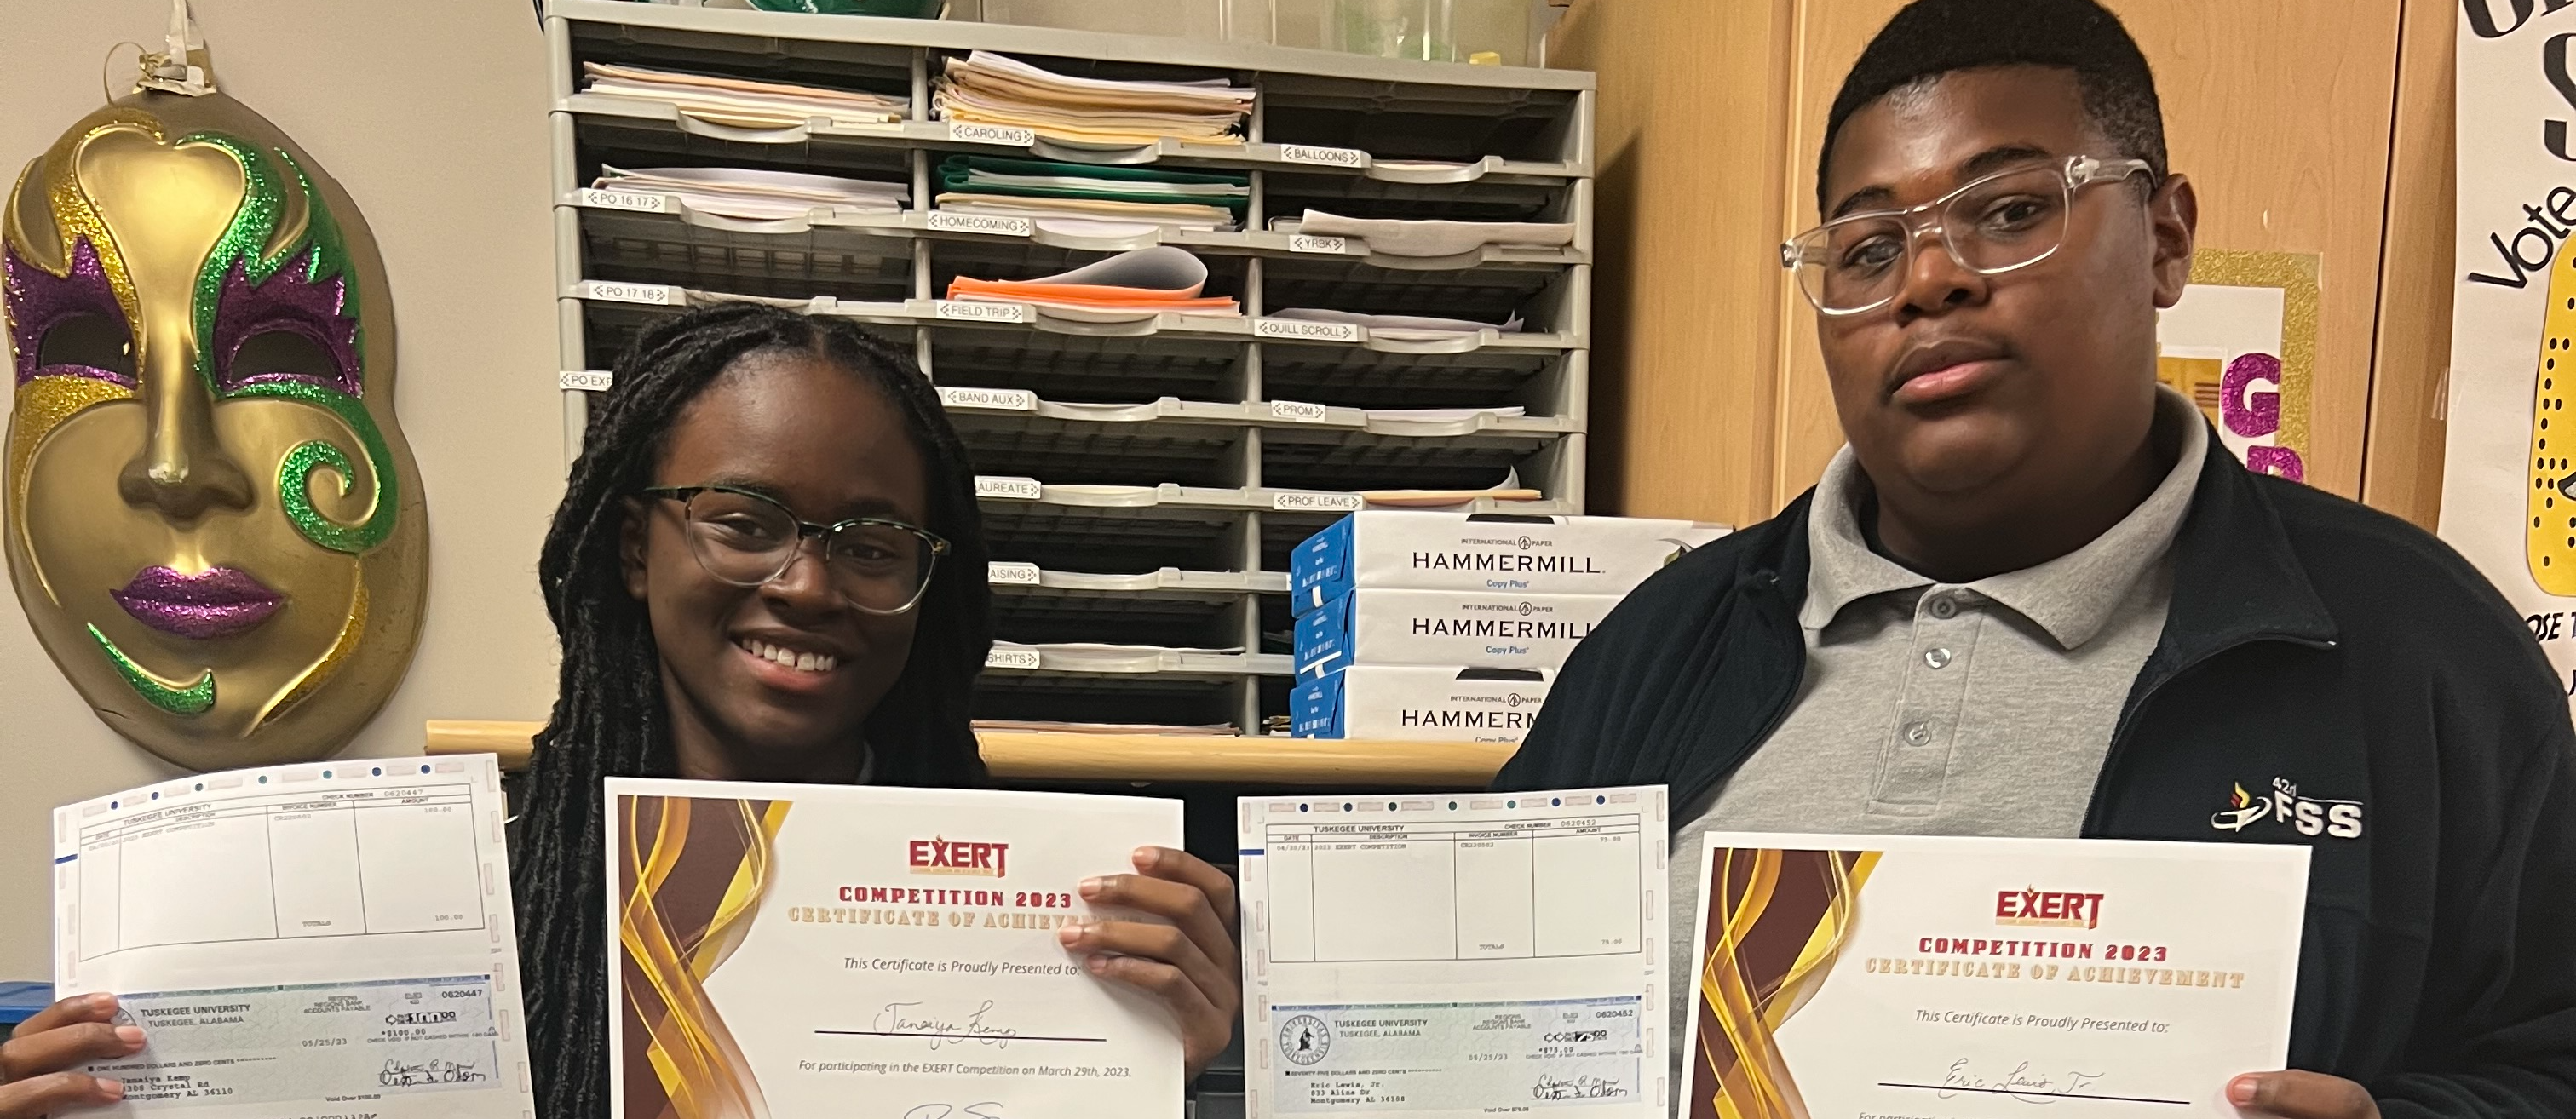 Career Tech students participated in Tuskegee University's 2023, 131 Farmer's Conference. These students are winners in the 6th Annual EXERT Competition component in the areas of Family and Consumer Science and Entrepreneurship.       Seen here, these Career Tech students are holding their $100 check and winning certificates!     Career Tech student Eric Lewis (FBLA) was a winner in the Entrepreneurship component. He pitched a business plan.      Career Tech student Janaiya Kemp (FCCLA) was a winner in the Family and Consumer Science component. She pitched her innovative technology device that can be used to modernize agriculture. 